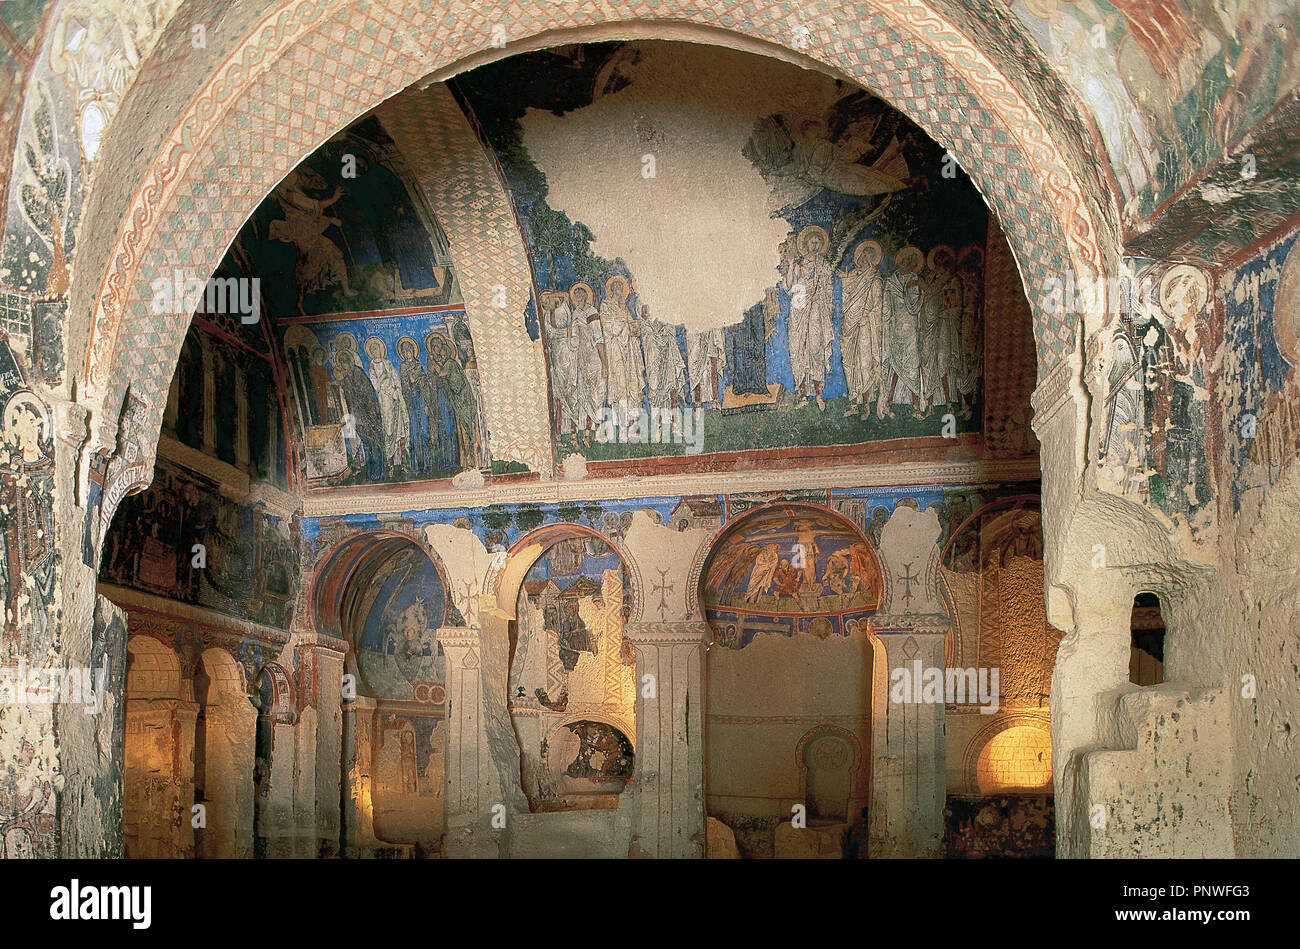 Turkey. Church of the Buckle (Tokali Kilise). Interior decorated with frescoes. 10th-11th centuries. Goreme Valley. Cappadocia. Stock Photo